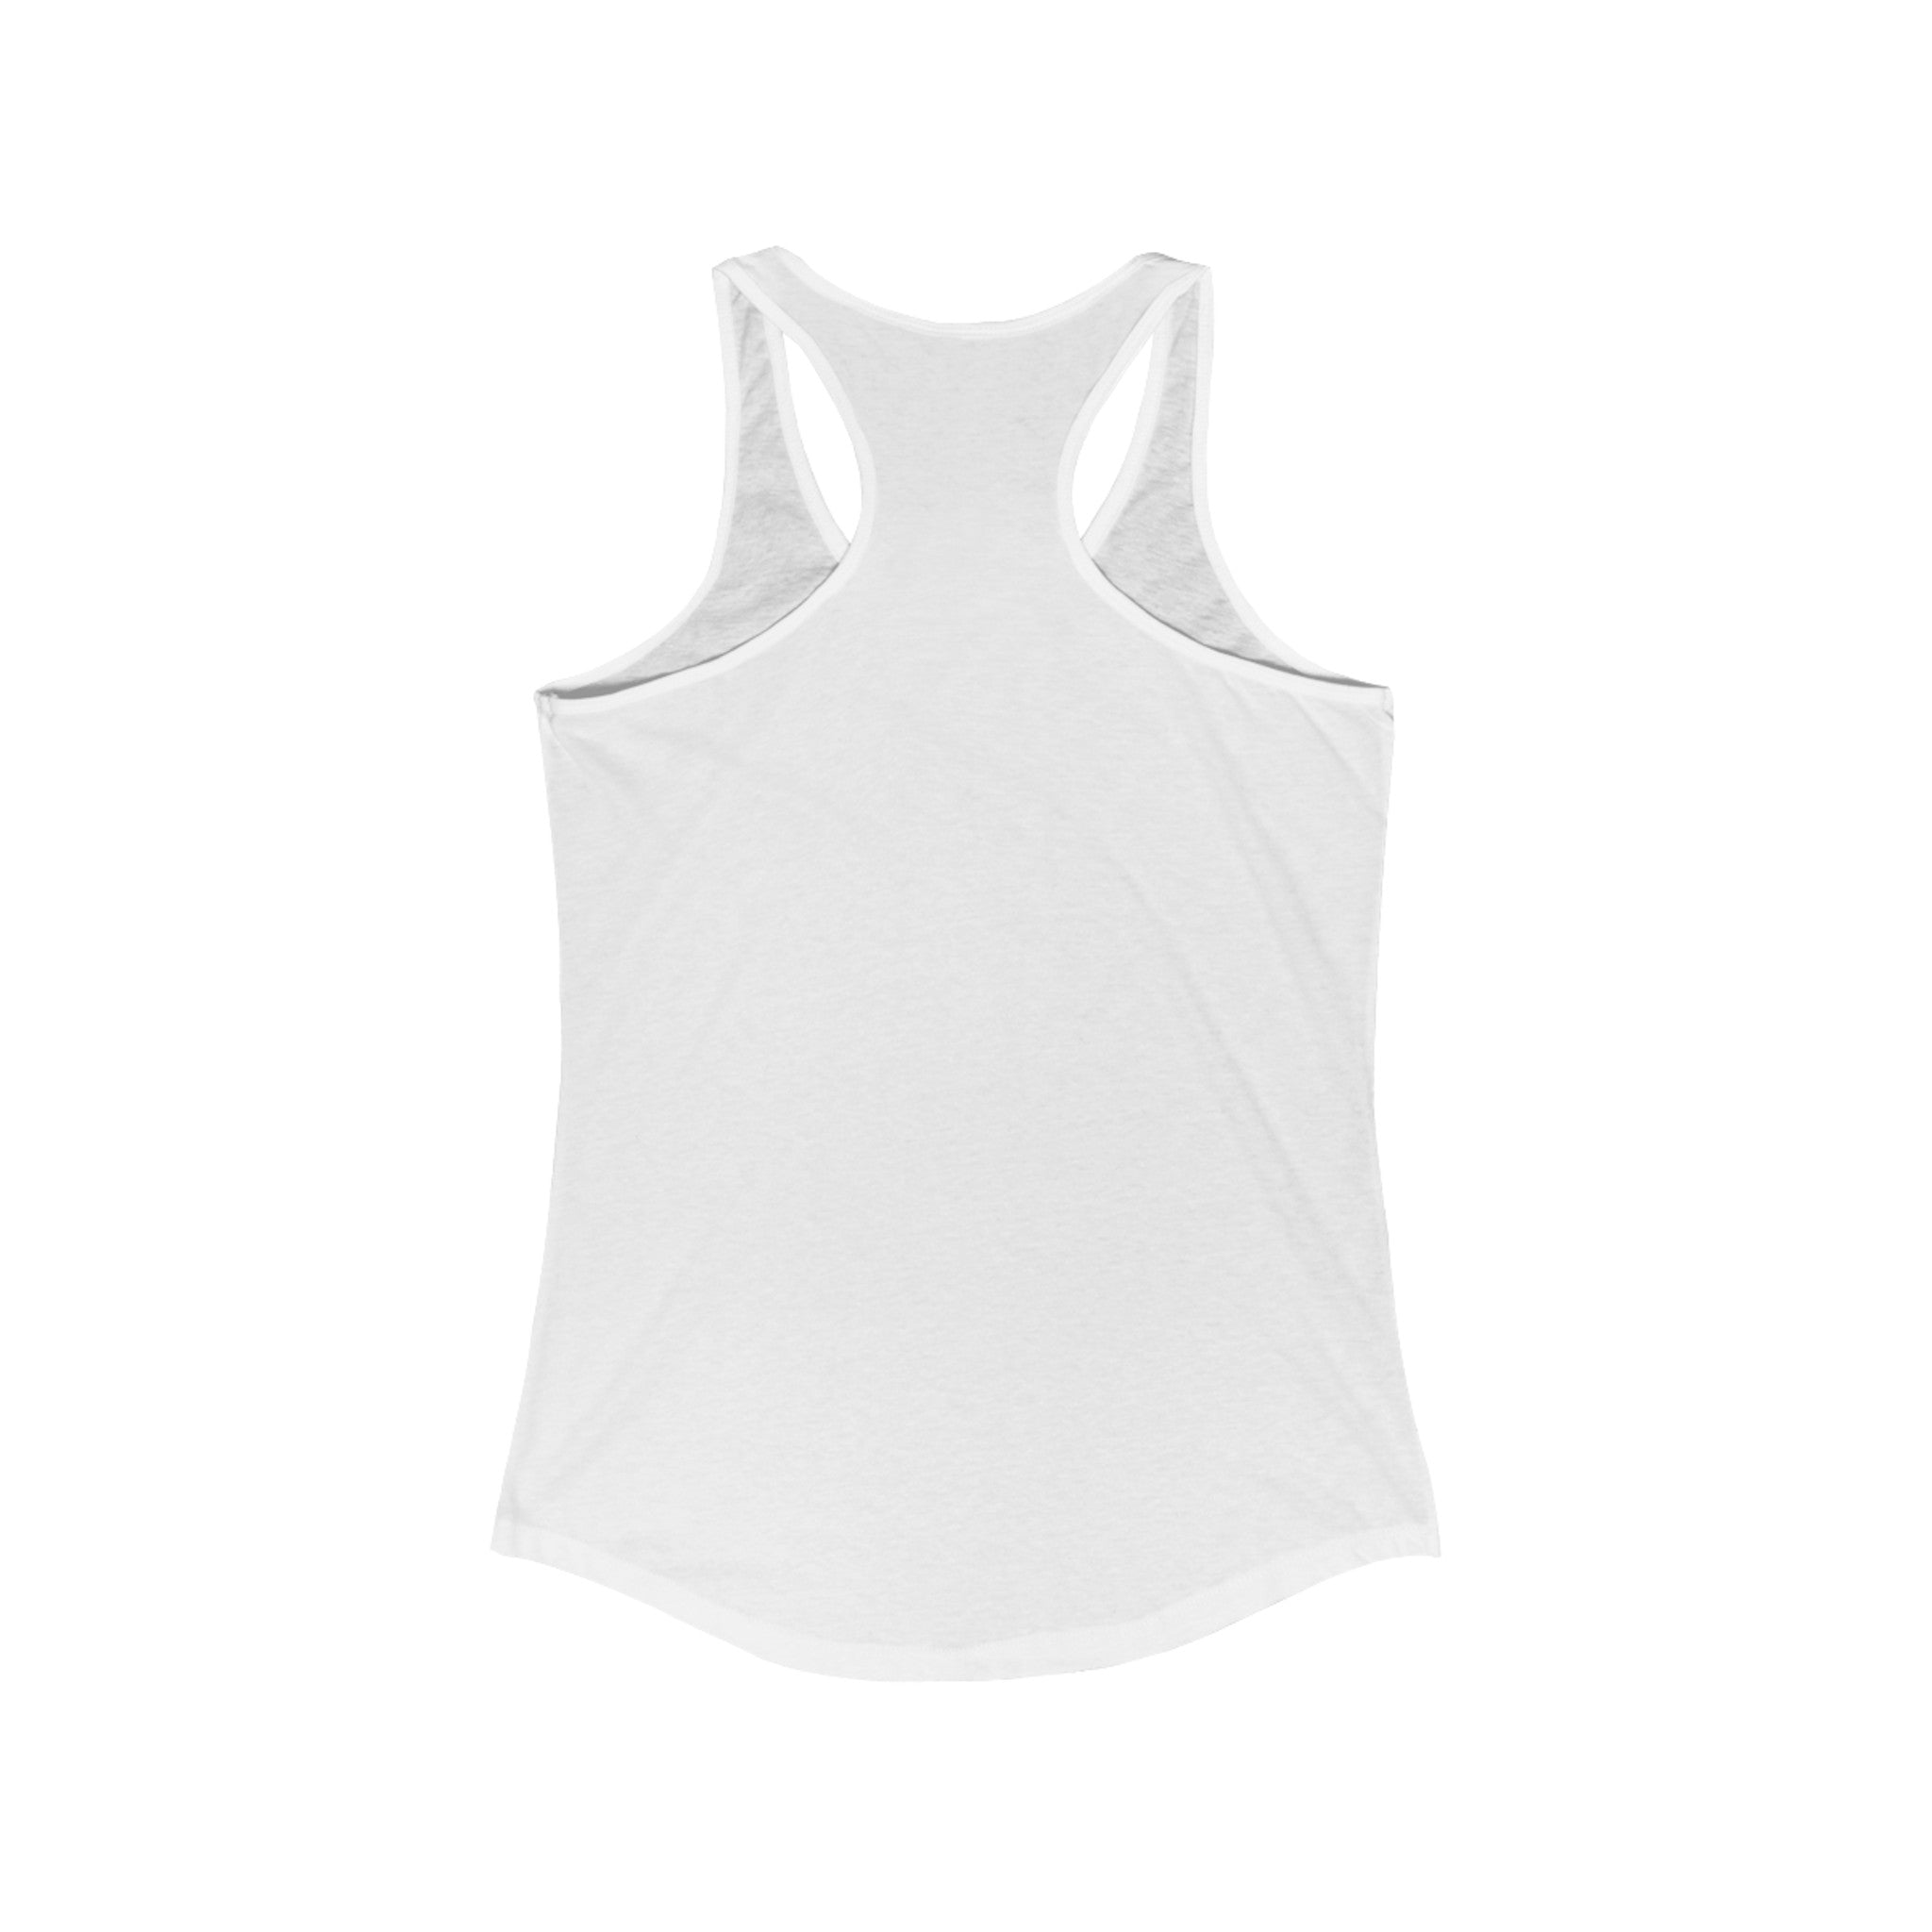 A back view of the Wings of Victory - Women's Racerback Tank, perfect for active living, showcases its simplistic elegance in plain white.